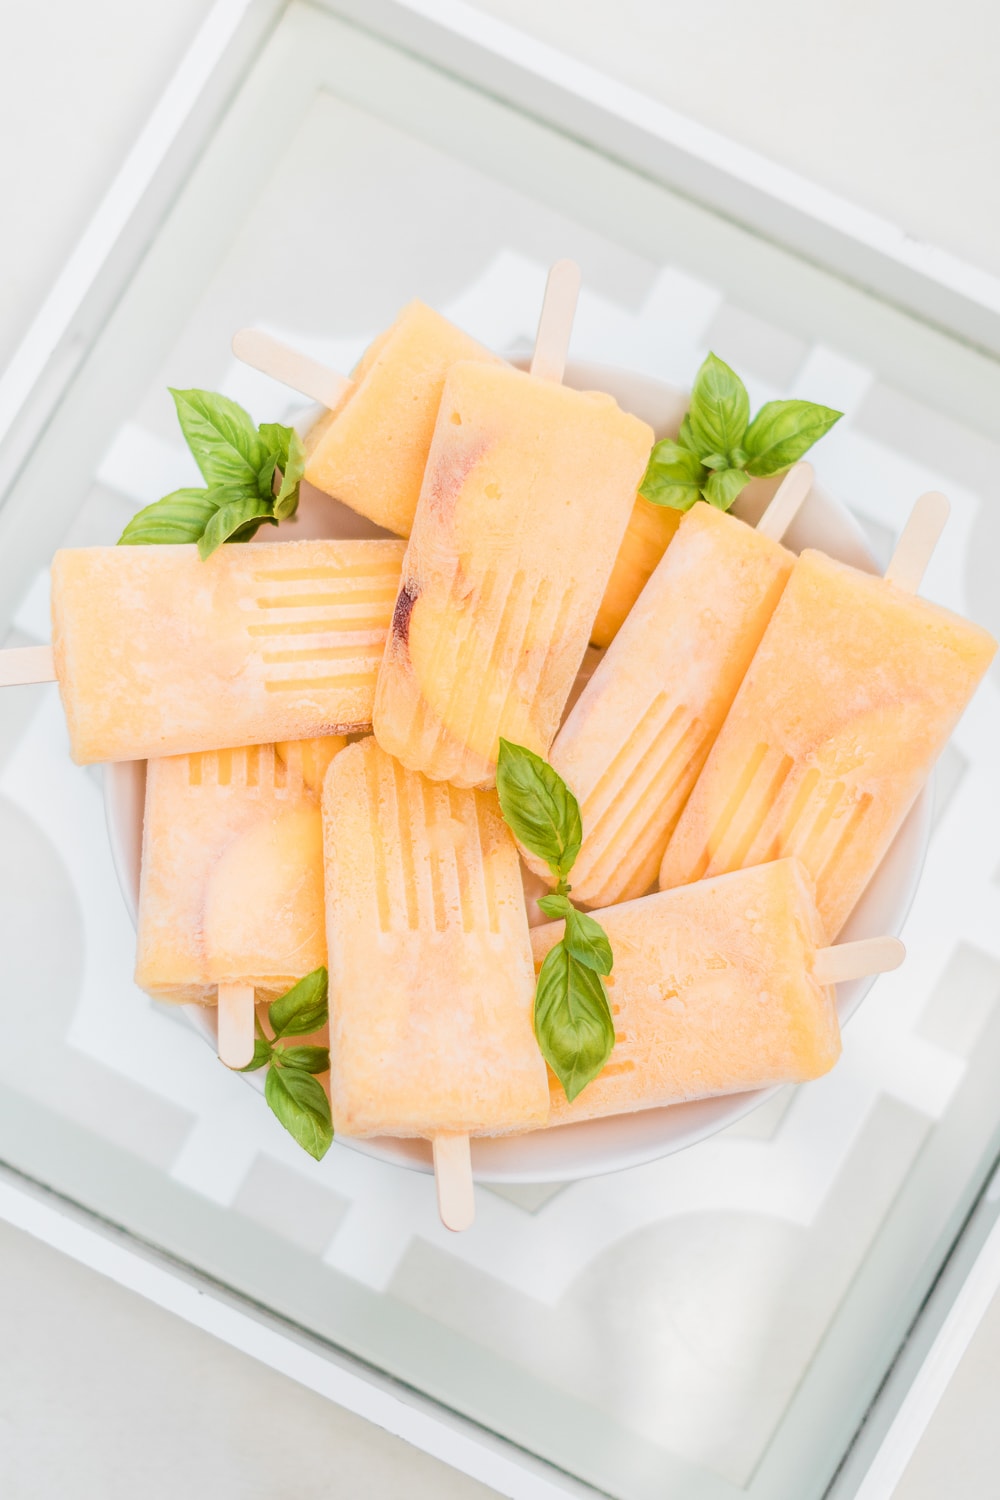 Boozy bellini popsicles recipe by southern lifestyle blogger Stephanie Ziajka on Diary of a Debutante